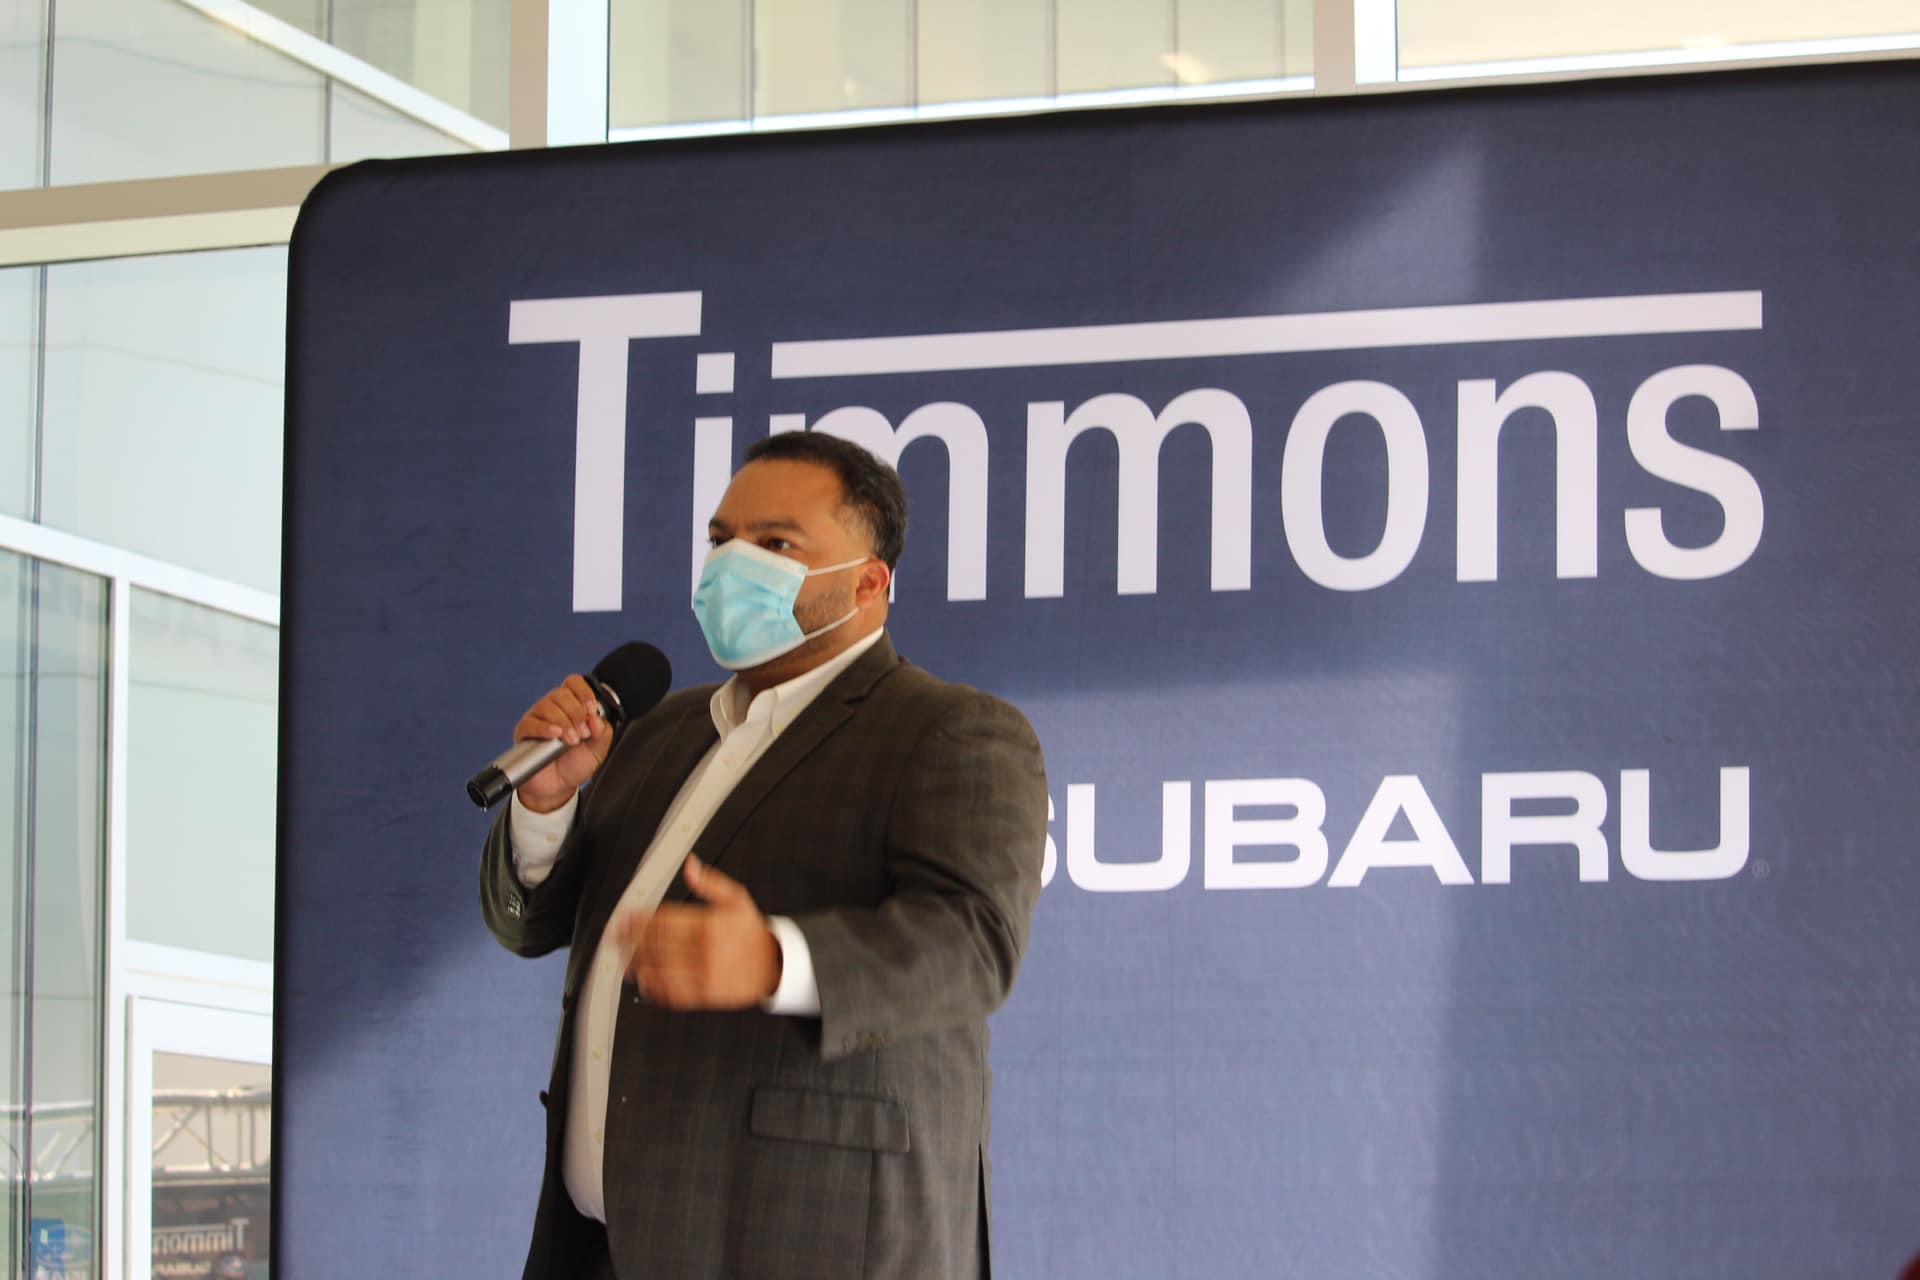 Jose Solache from the Lakewood Chamber at the all new Timmons Subaru Grand Opening Ribbon Cutting Event